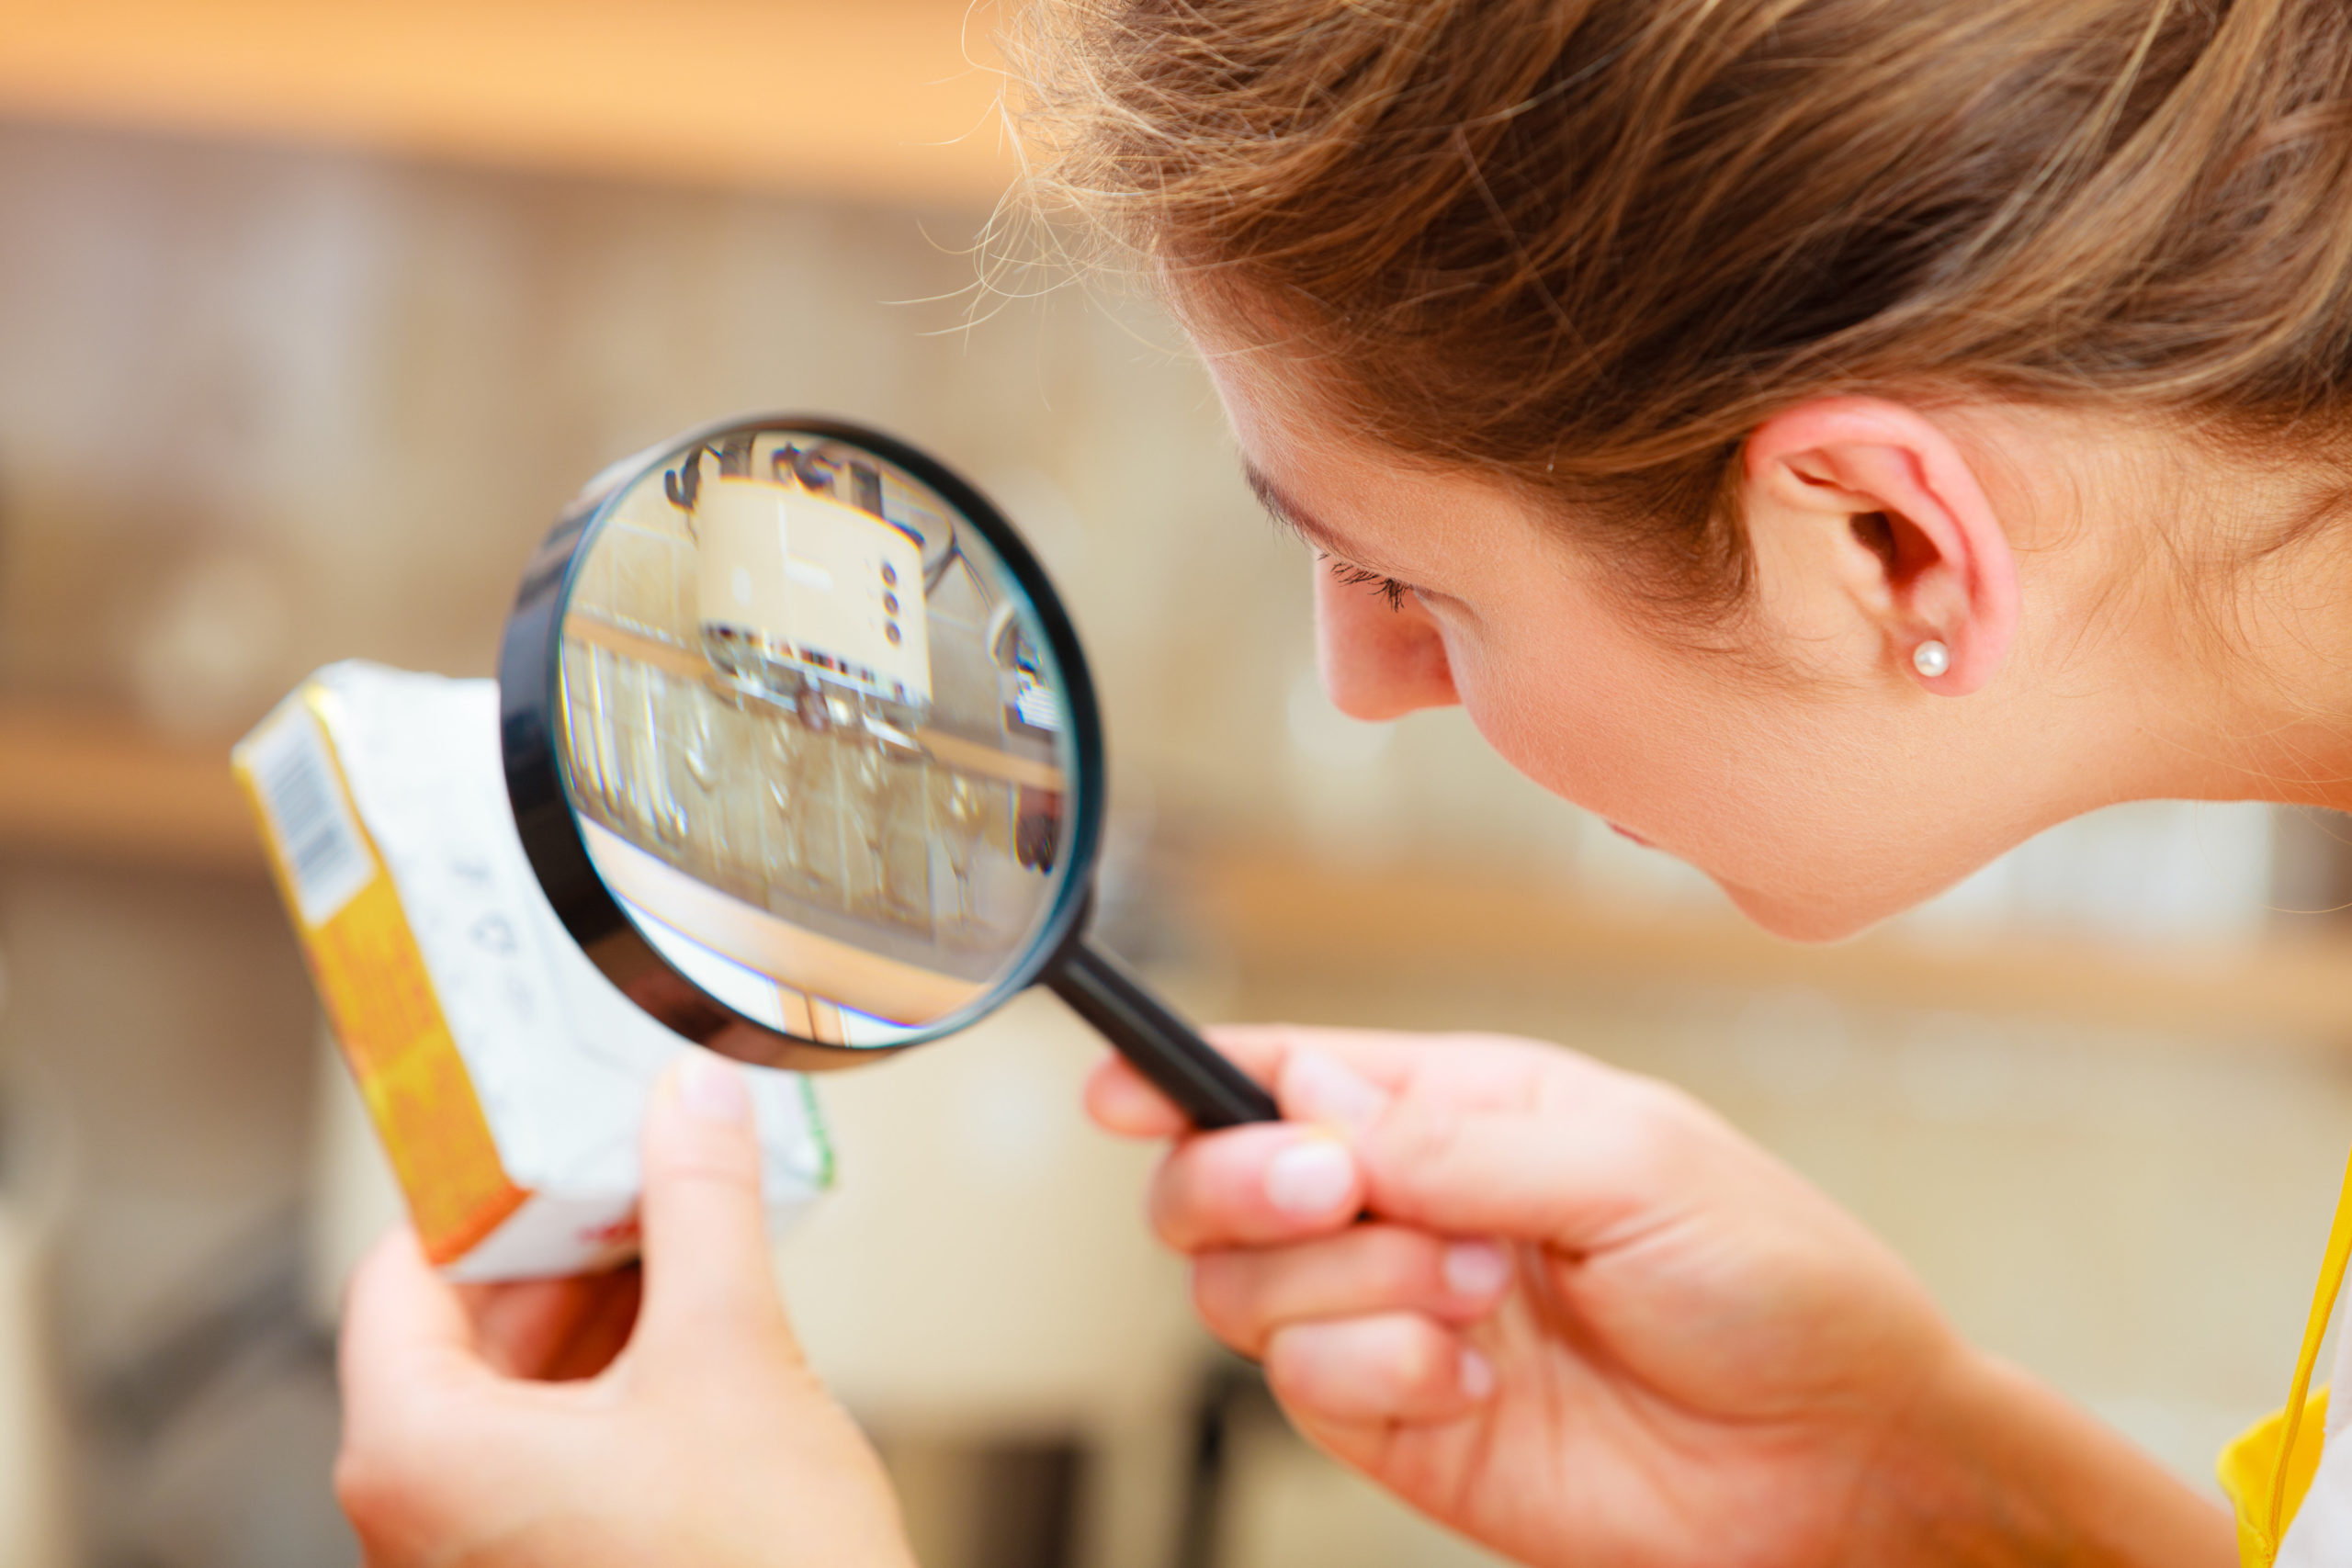 woman inspecting package ingredients with magnifying glass